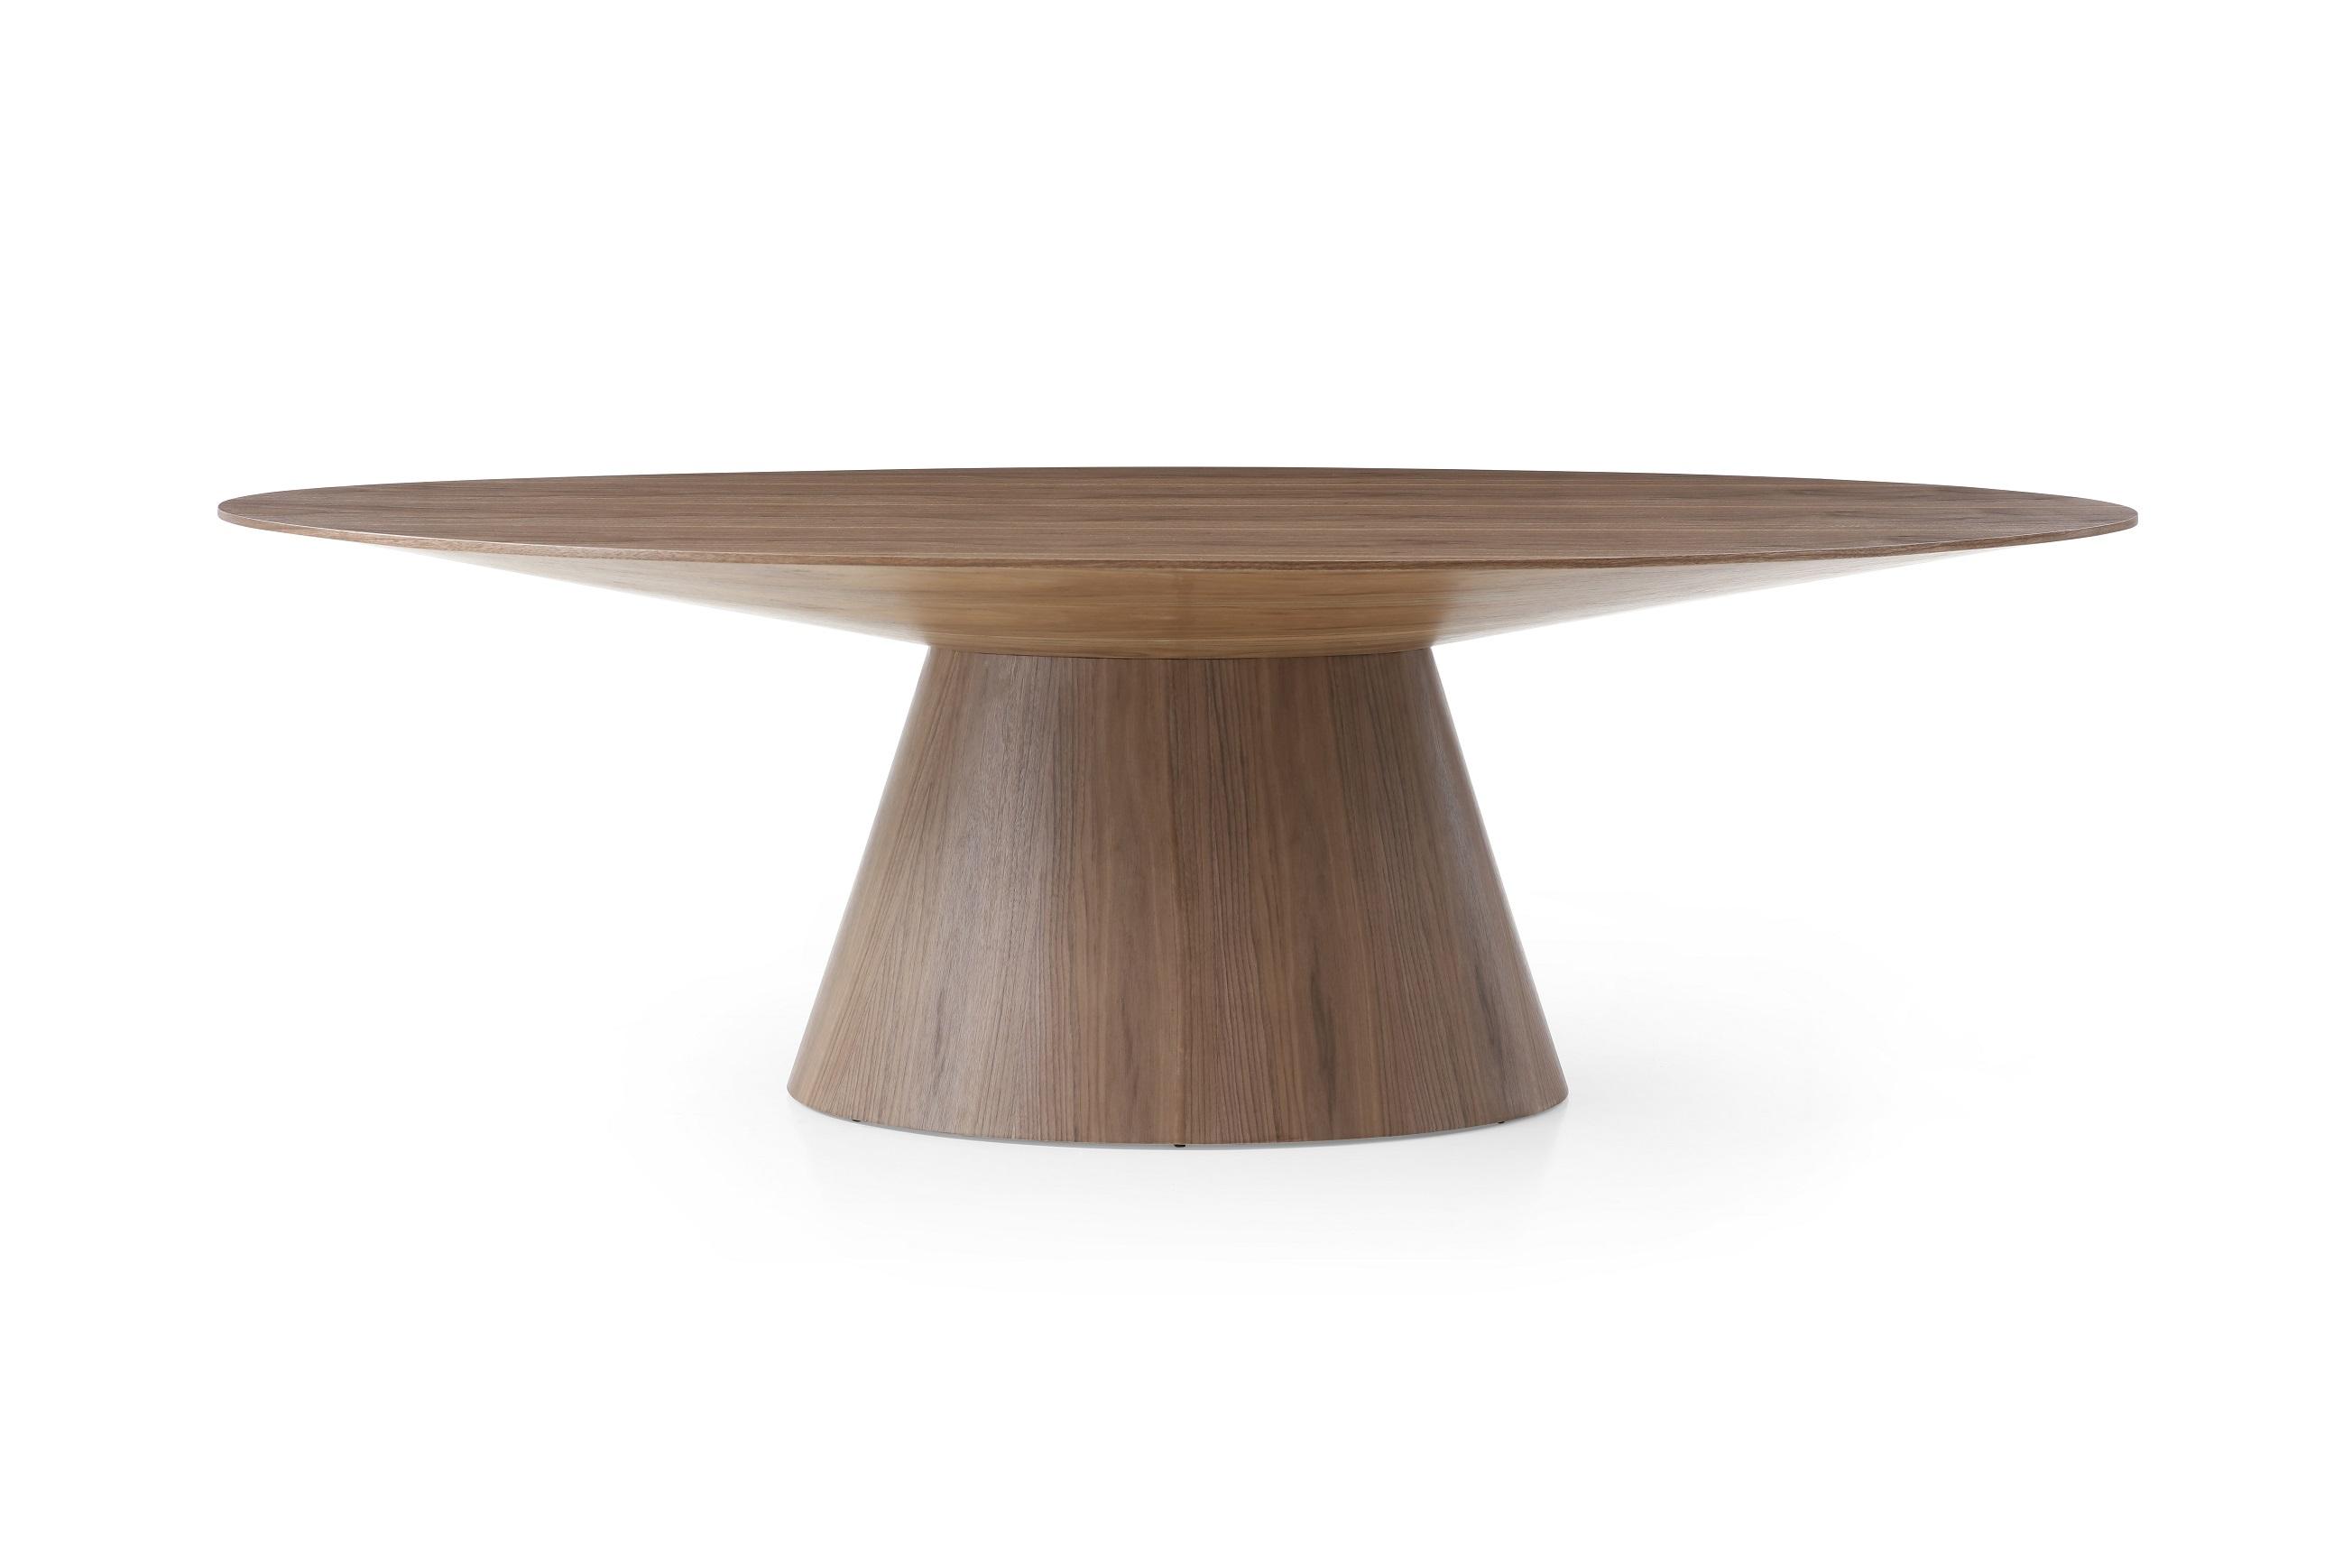 Transitional Dining Table DT1474-WLT Bruno DT1474-WLT in Walnut 